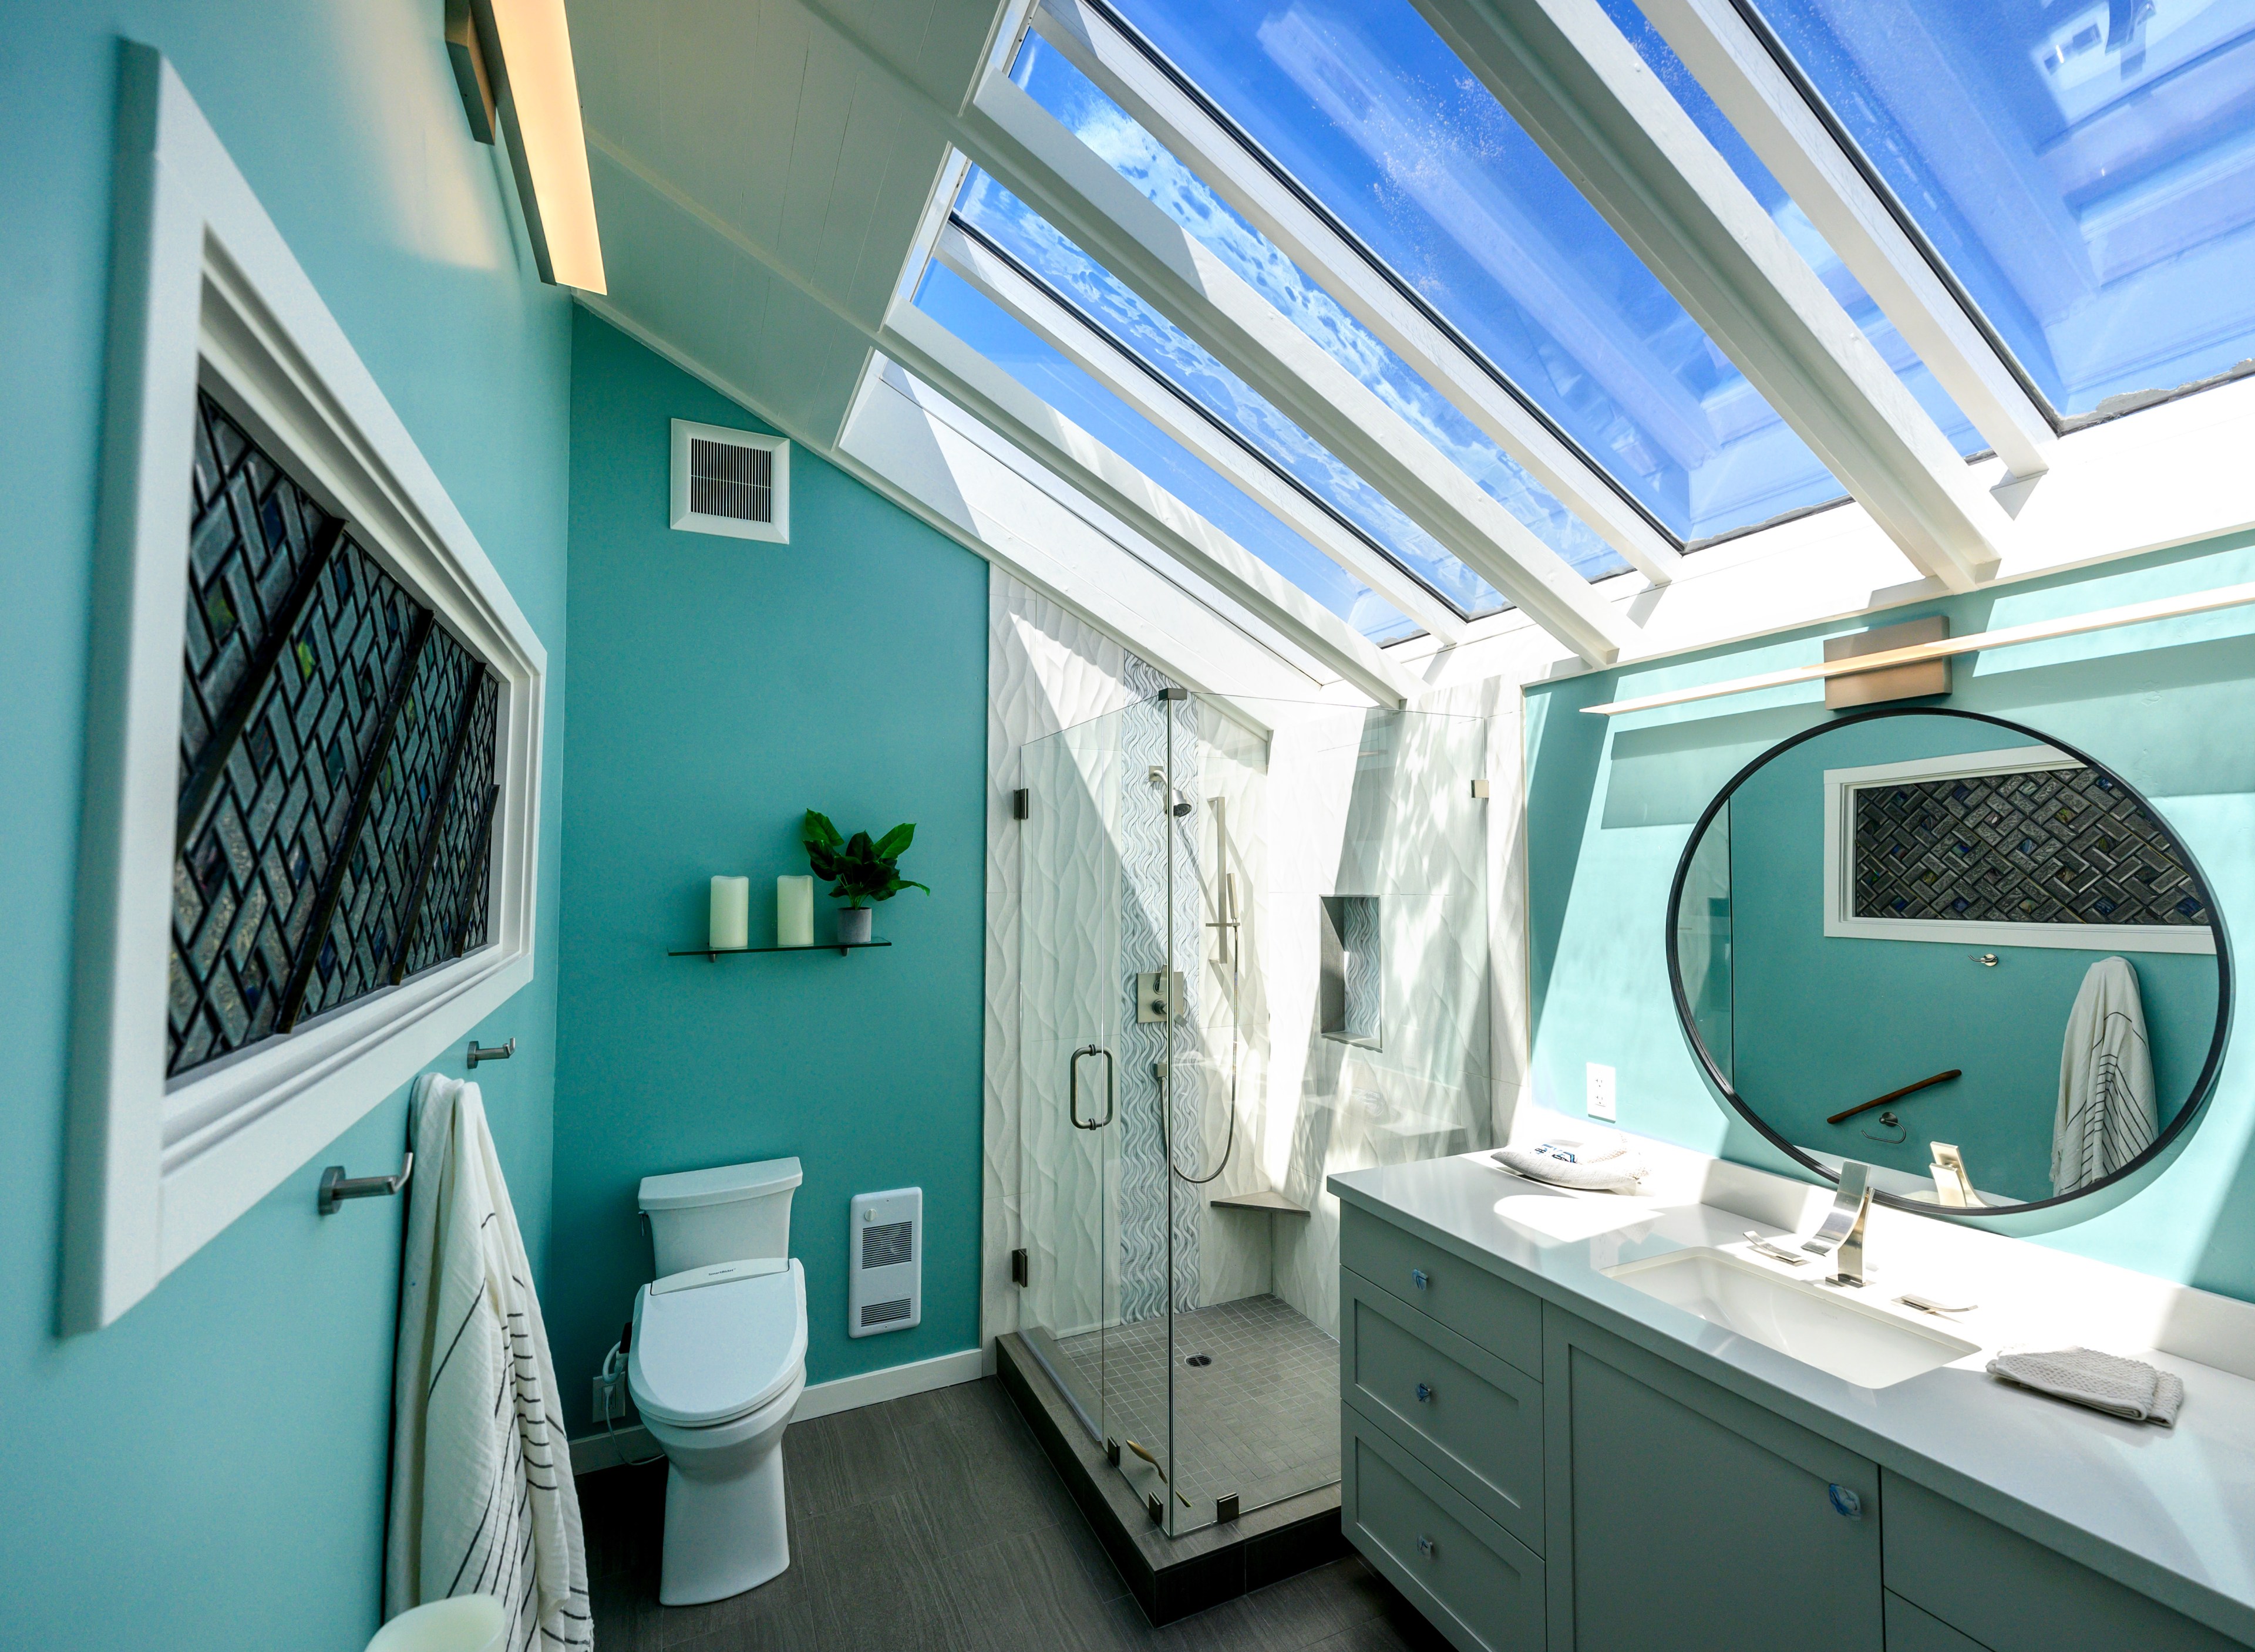 A modern bathroom with a skylight, glass shower, and teal walls.